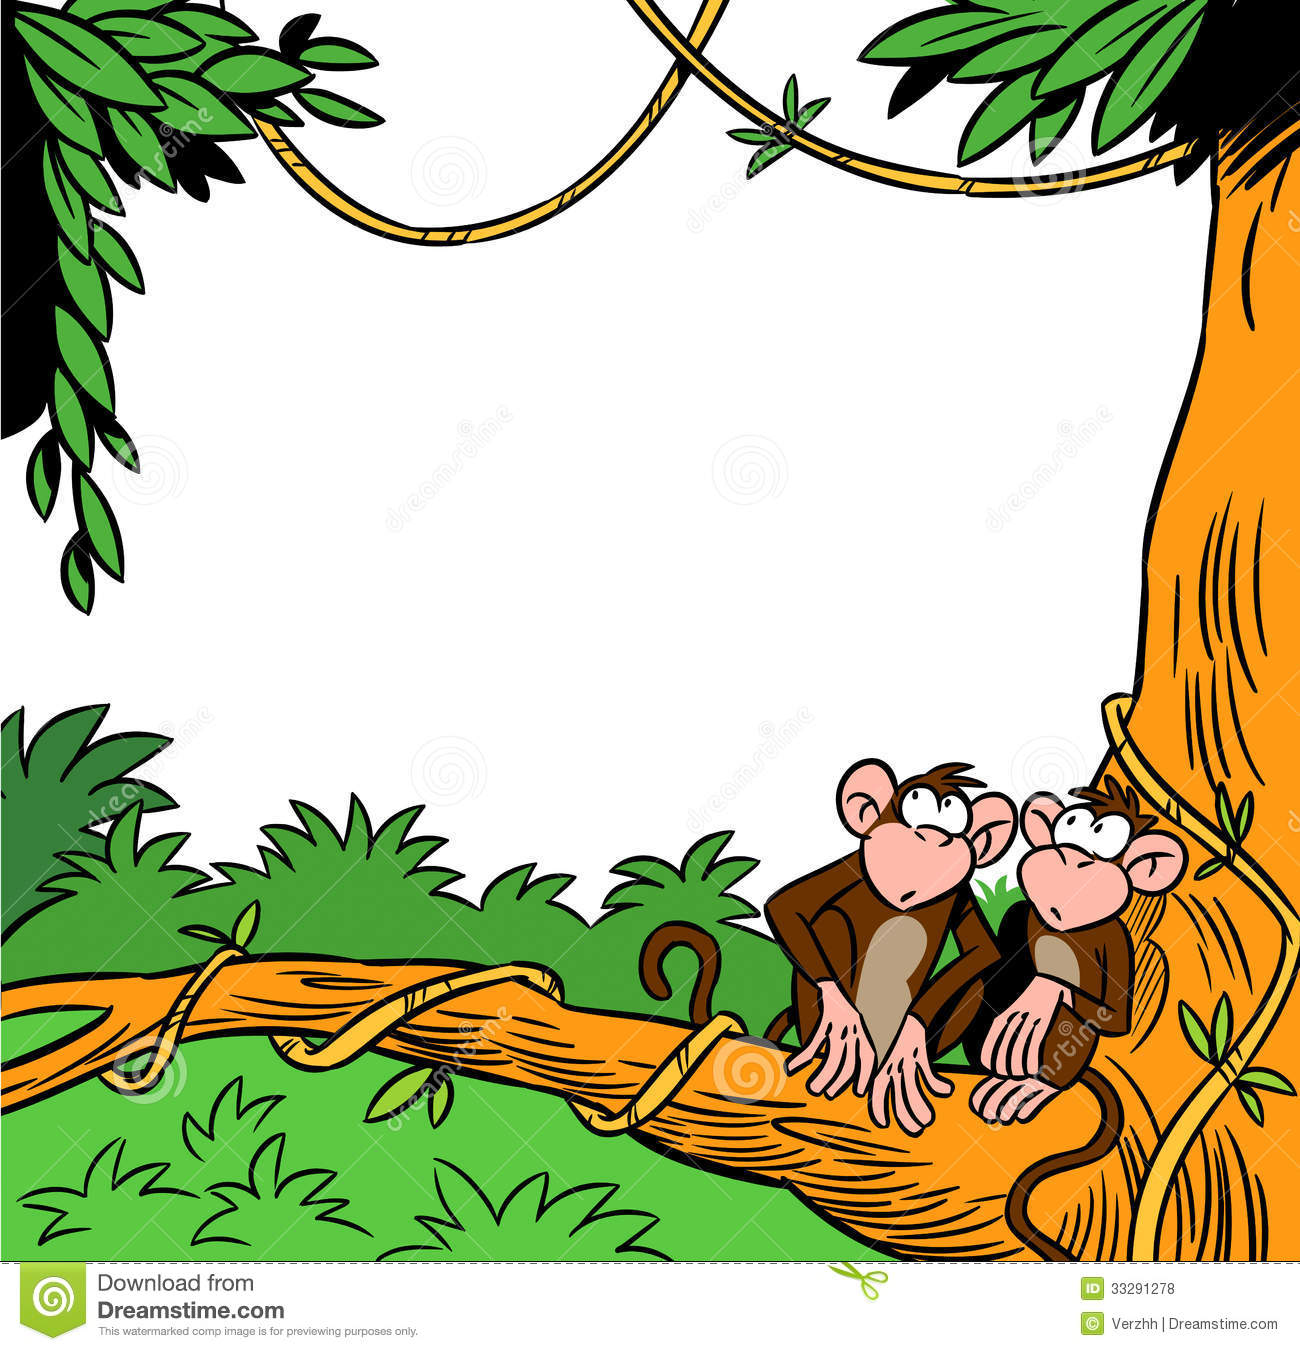 Monkey In A Tree Cartoon   Clipart Panda   Free Clipart Images